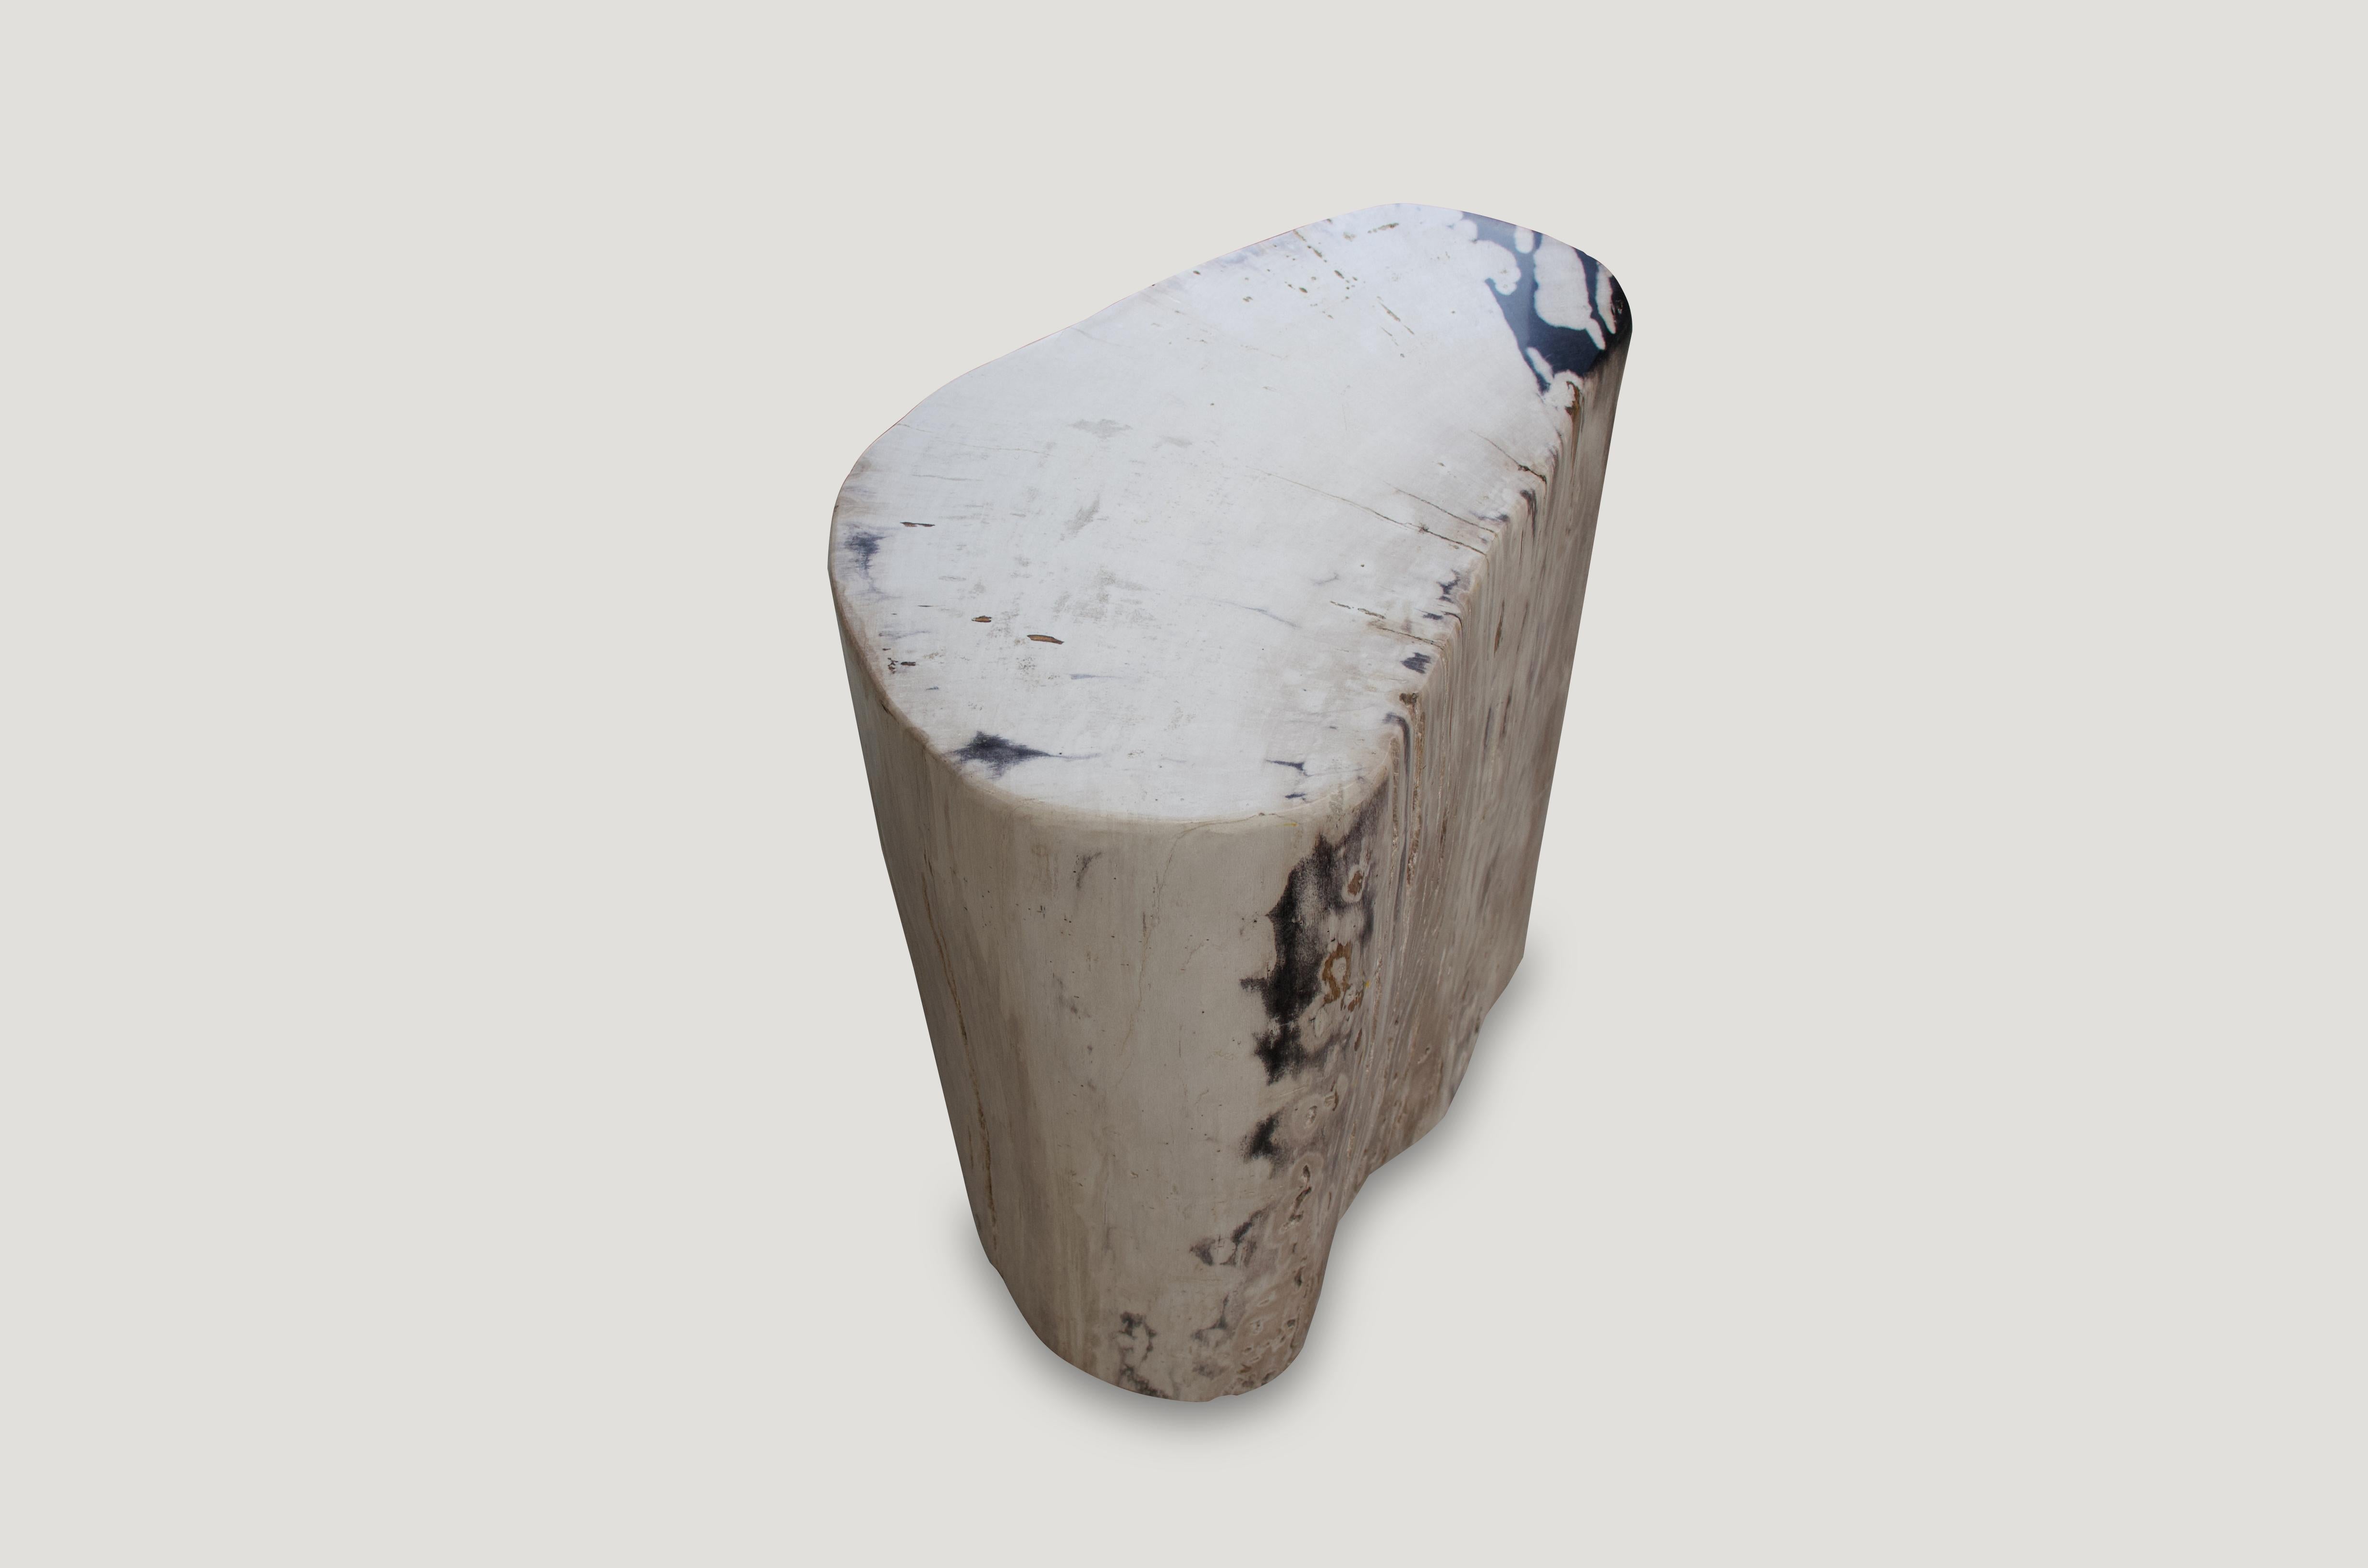 Stunning, hard to find soft pale tones on this super smooth, high quality petrified wood side table.

As with a diamond, we polish the highest quality fossilized petrified wood, using our latest ground breaking technology, to reveal its natural